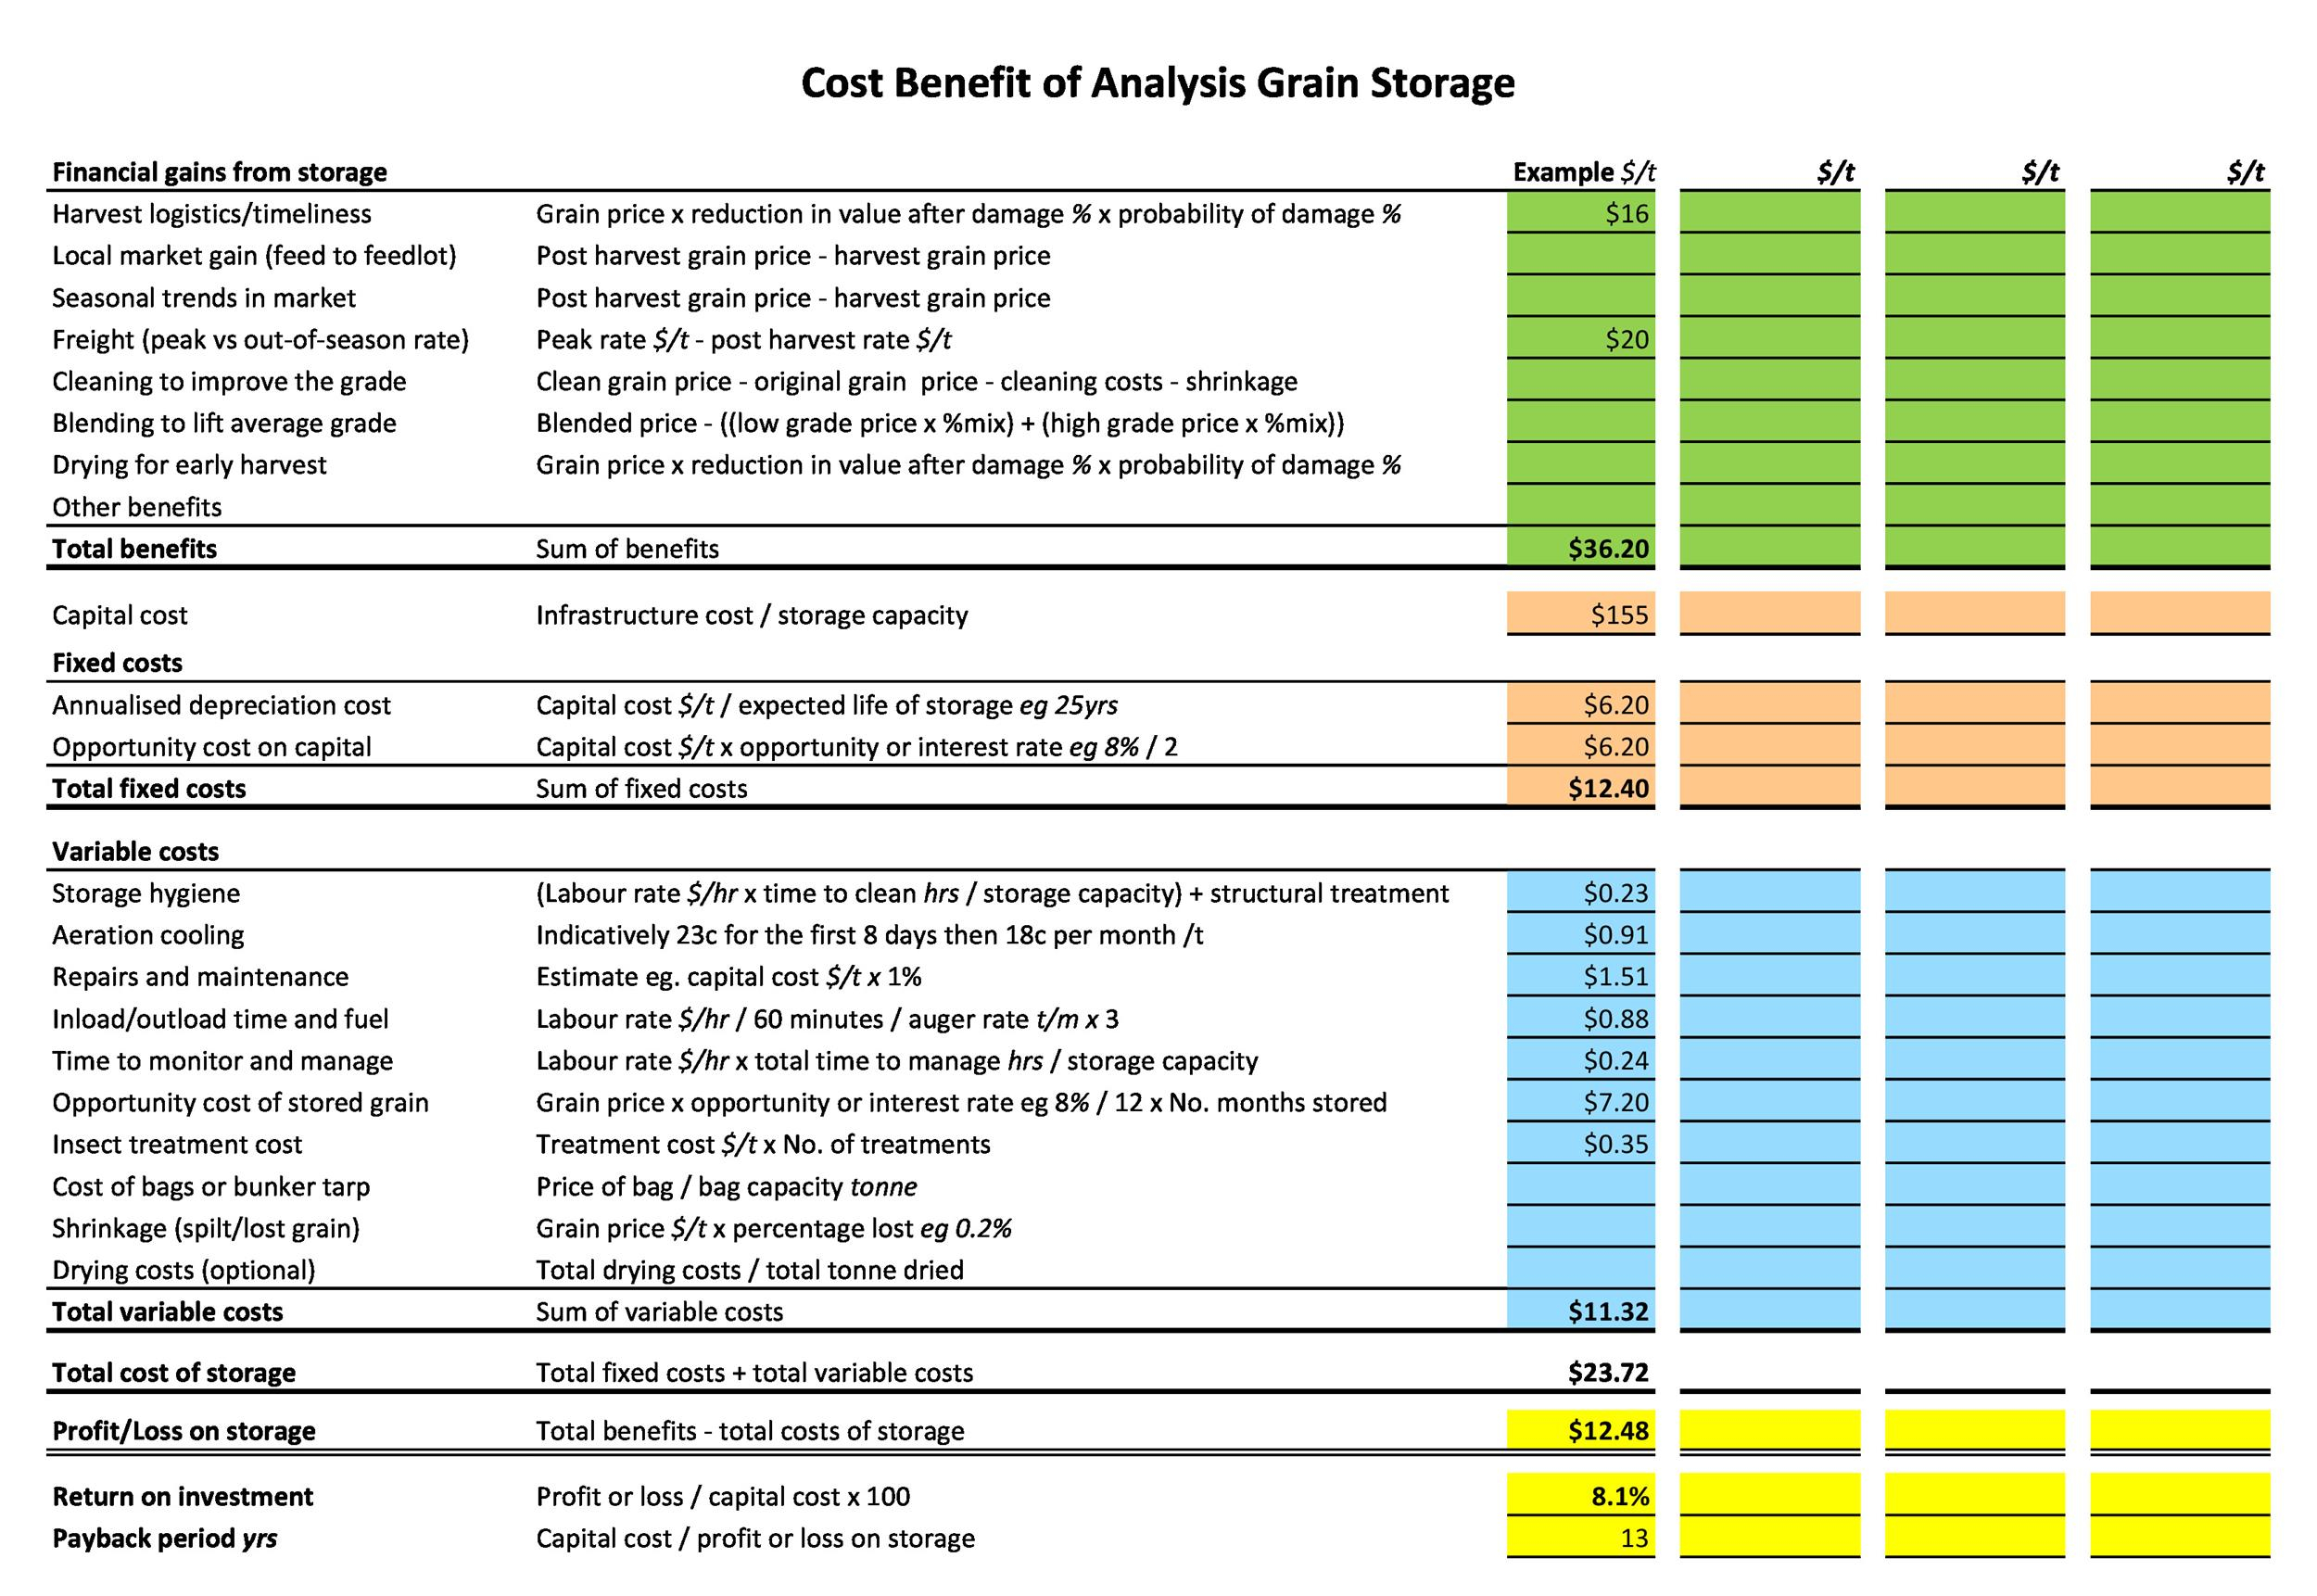 11+ Cost Benefit Analysis Templates & Examples! ᐅ TemplateLab With Cost Benefit Analysis Spreadsheet Template Inside Cost Benefit Analysis Spreadsheet Template